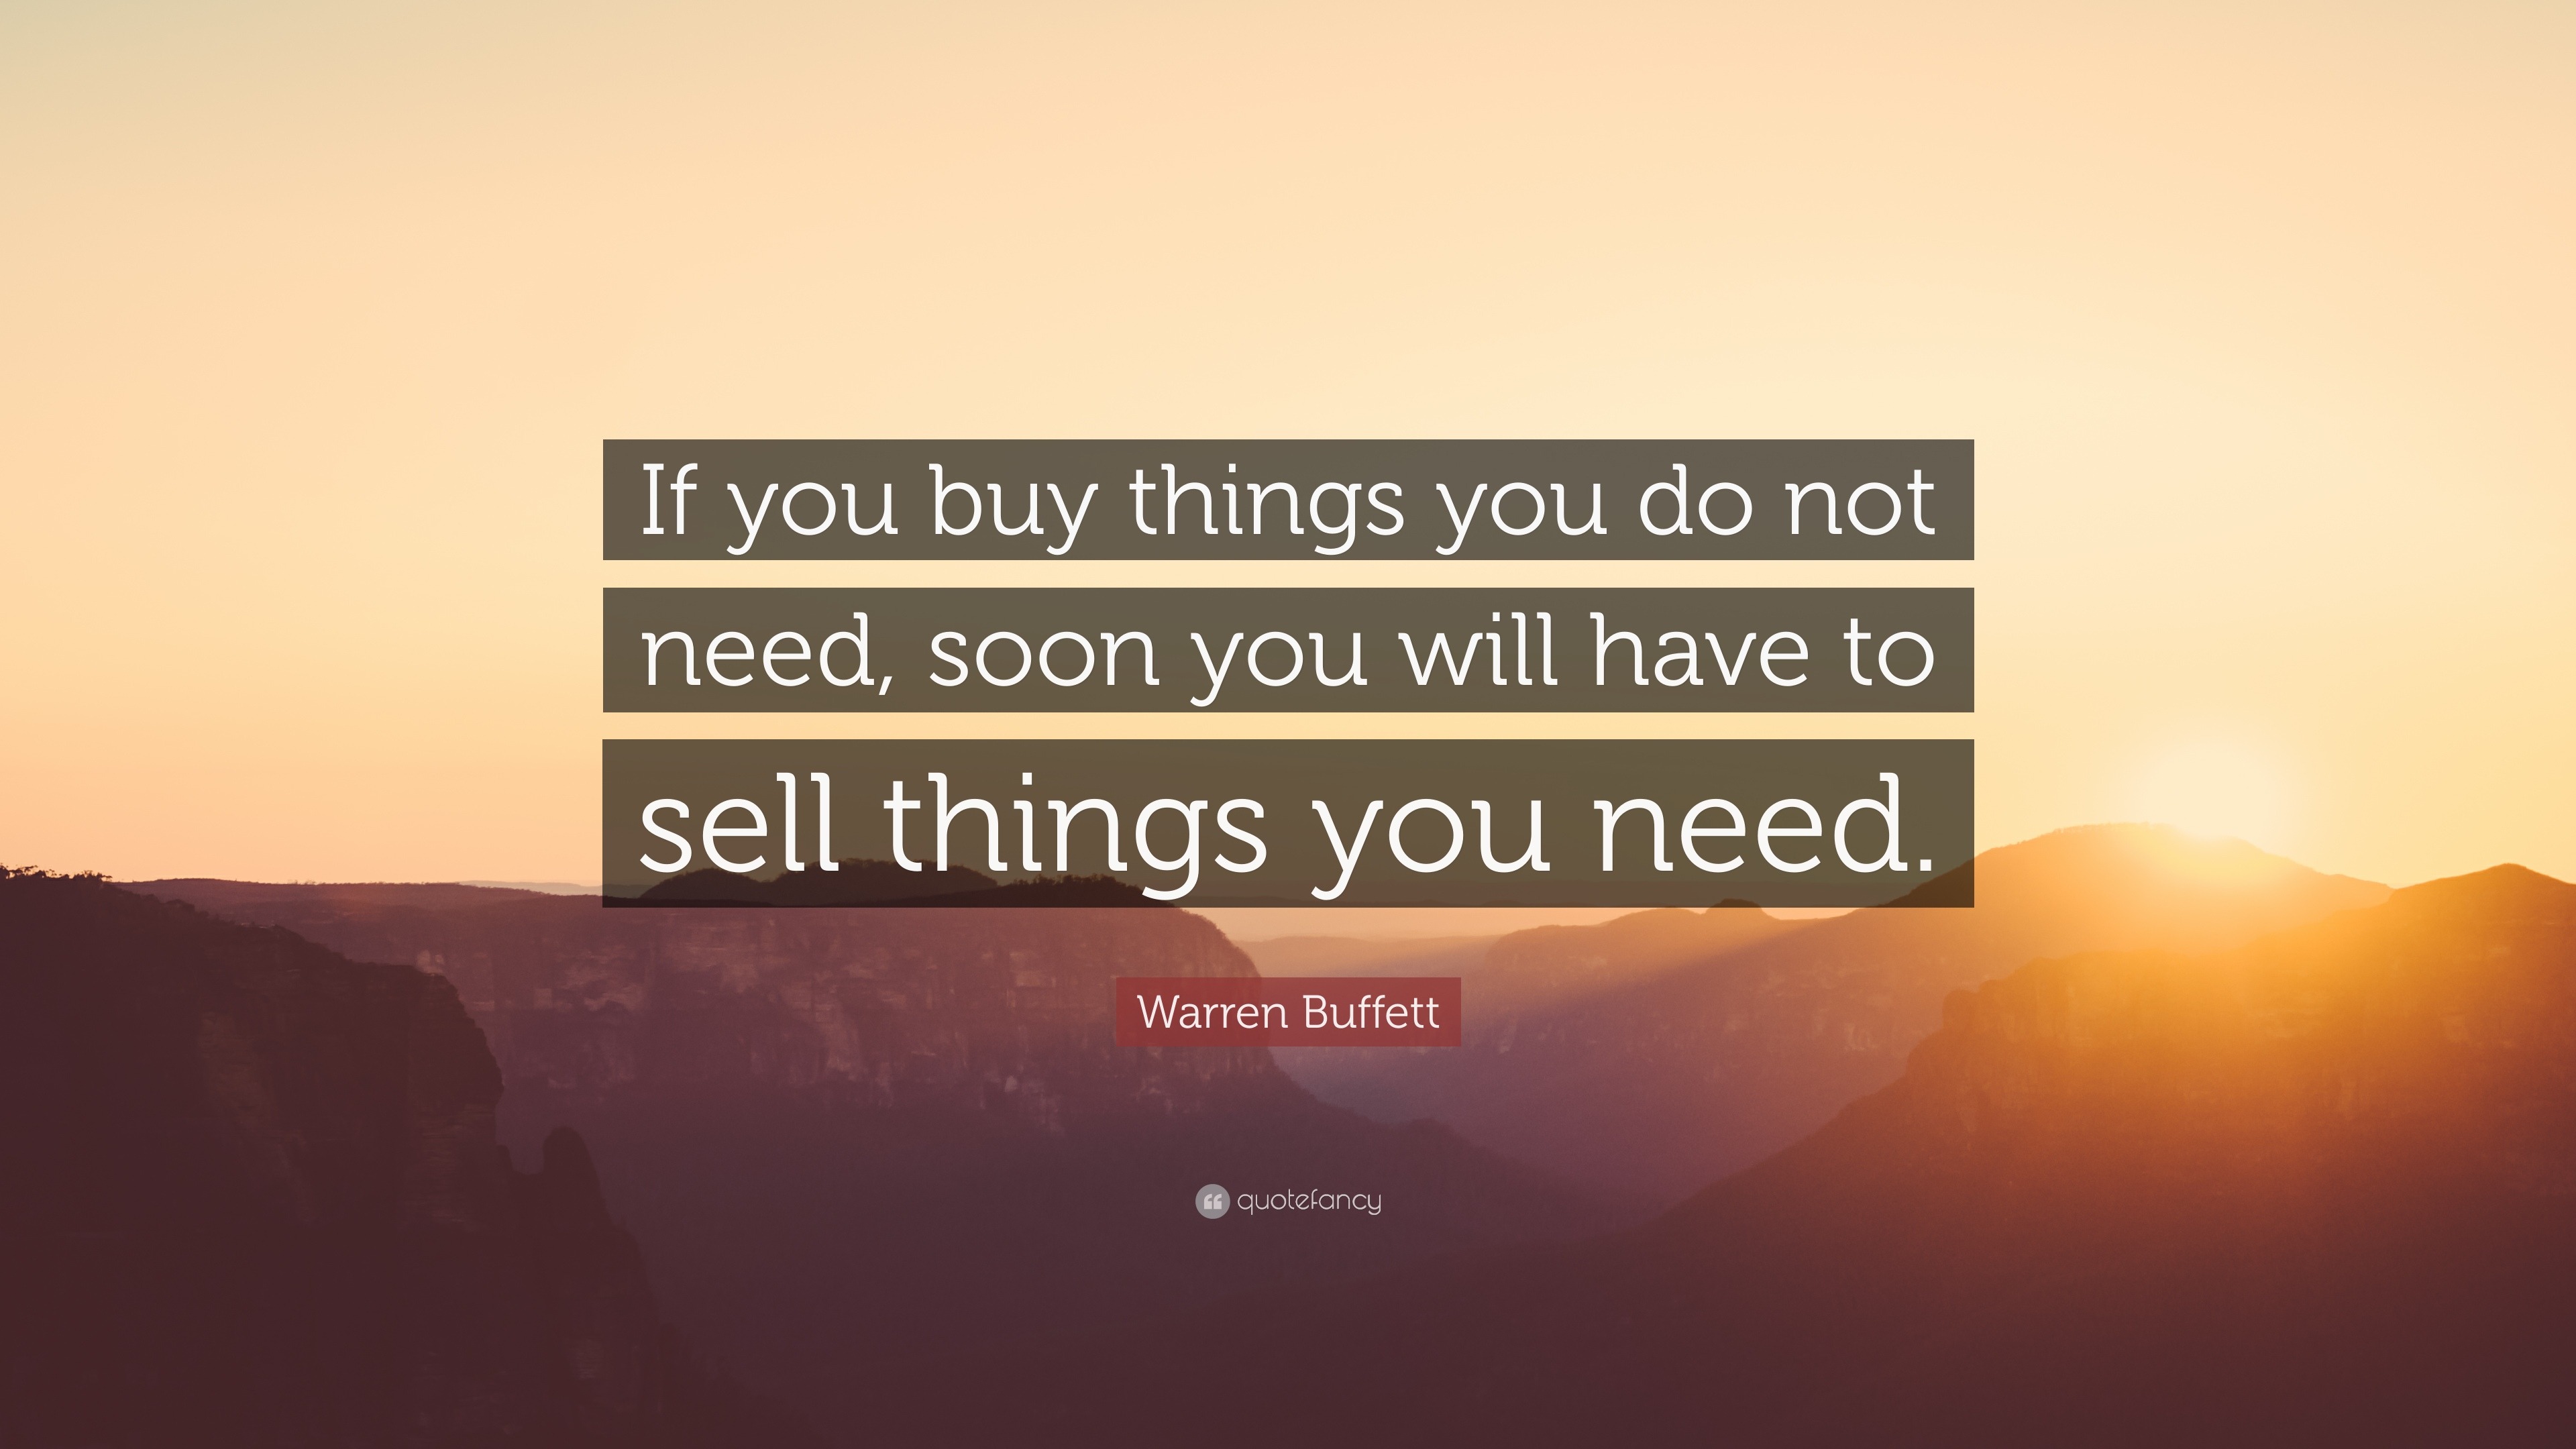 Warren Buffett Quote “if You Buy Things You Do Not Need Soon You Will Have To Sell Things You